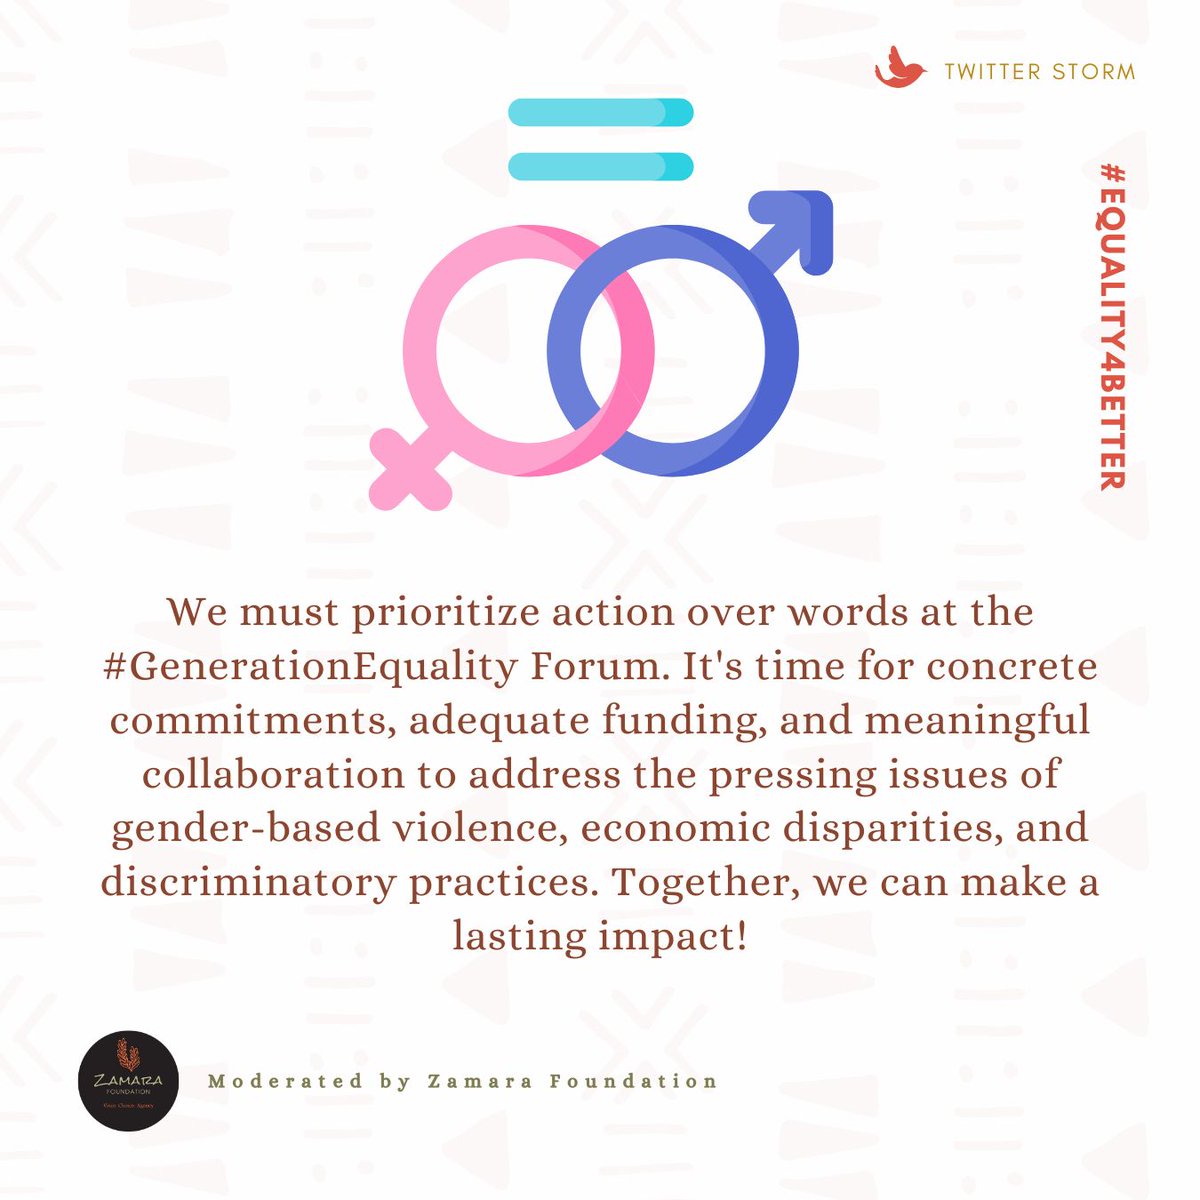 We must Prioritize action over words are the #Generationequality forum

#Equality4Better #Zamaravoices 

@Zamara_fdn